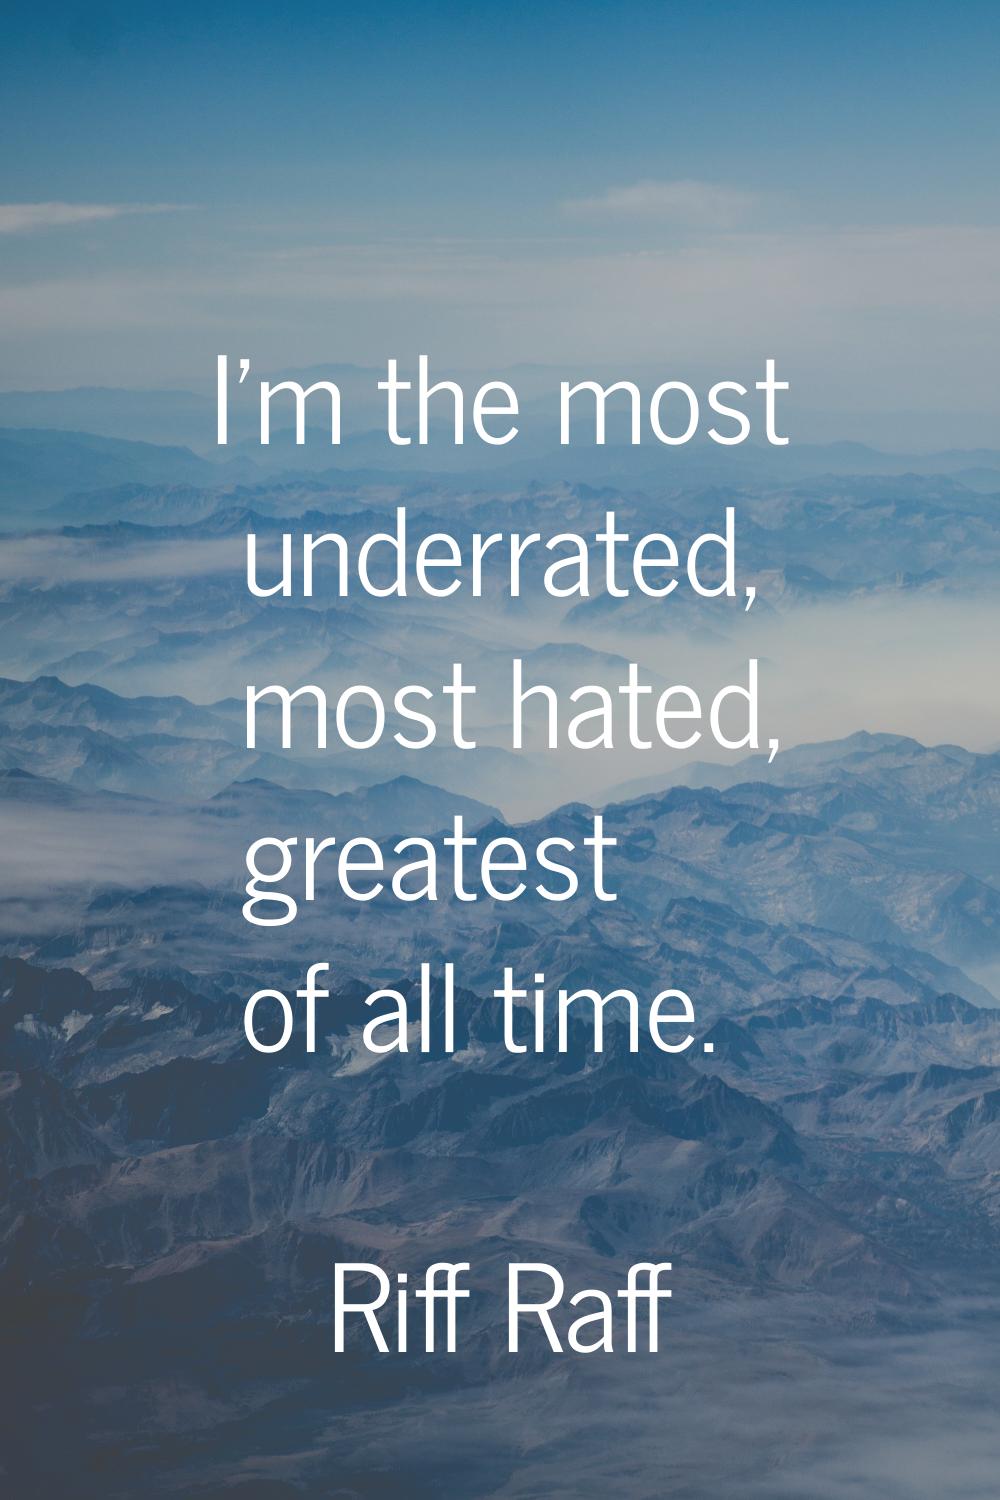 I'm the most underrated, most hated, greatest of all time.